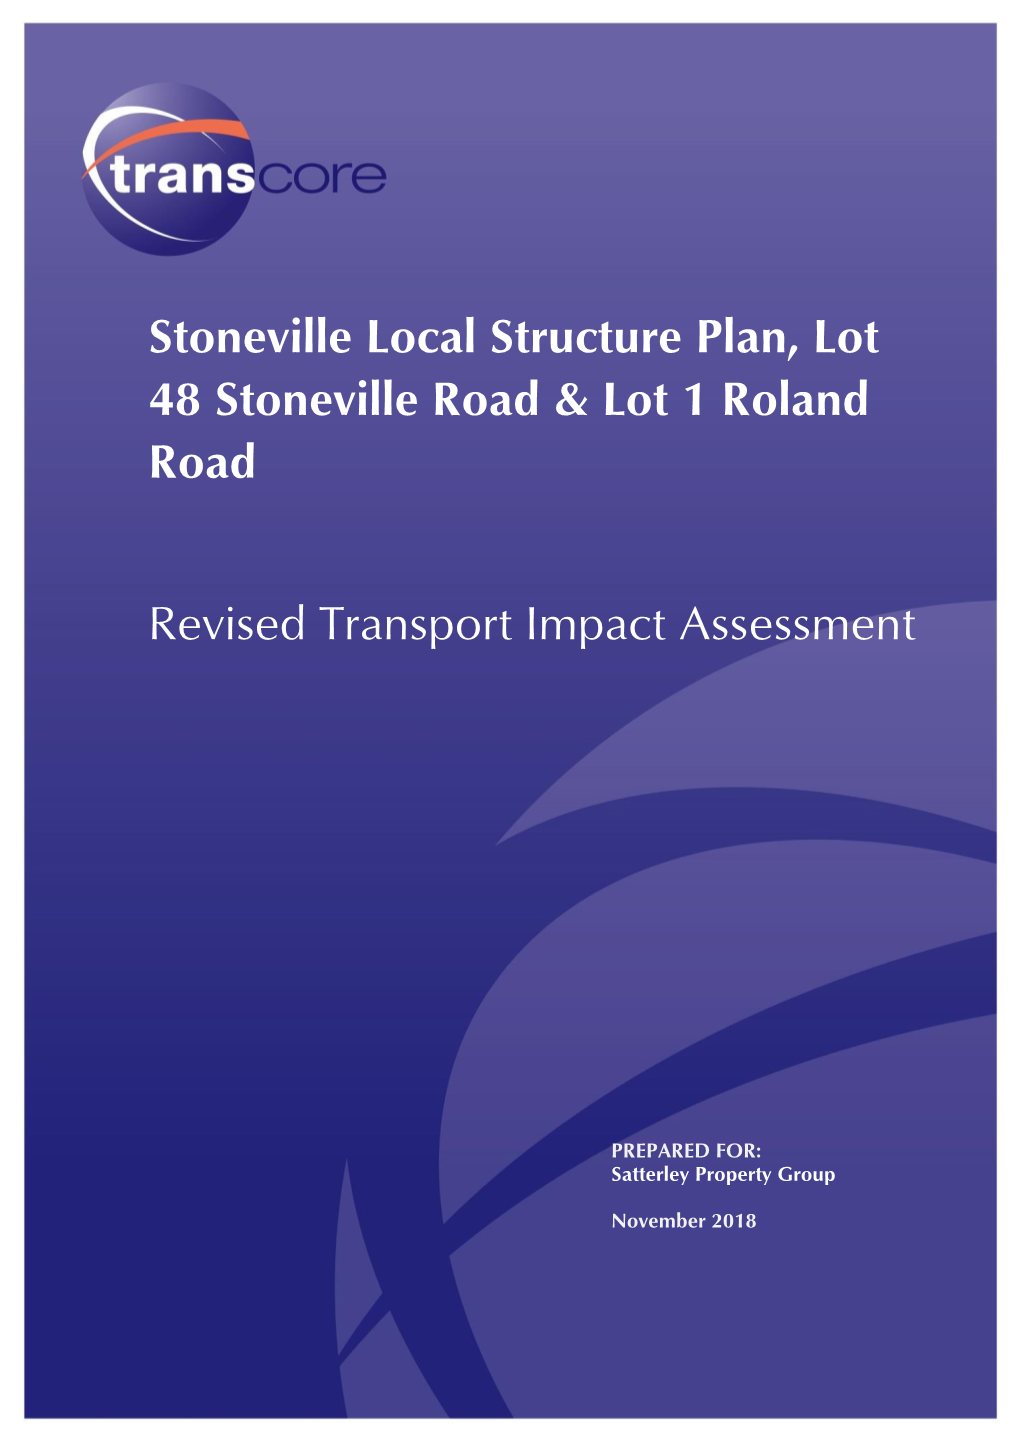 Stoneville Local Structure Plan, Lot 48 Stoneville Road & Lot 1 Roland Road